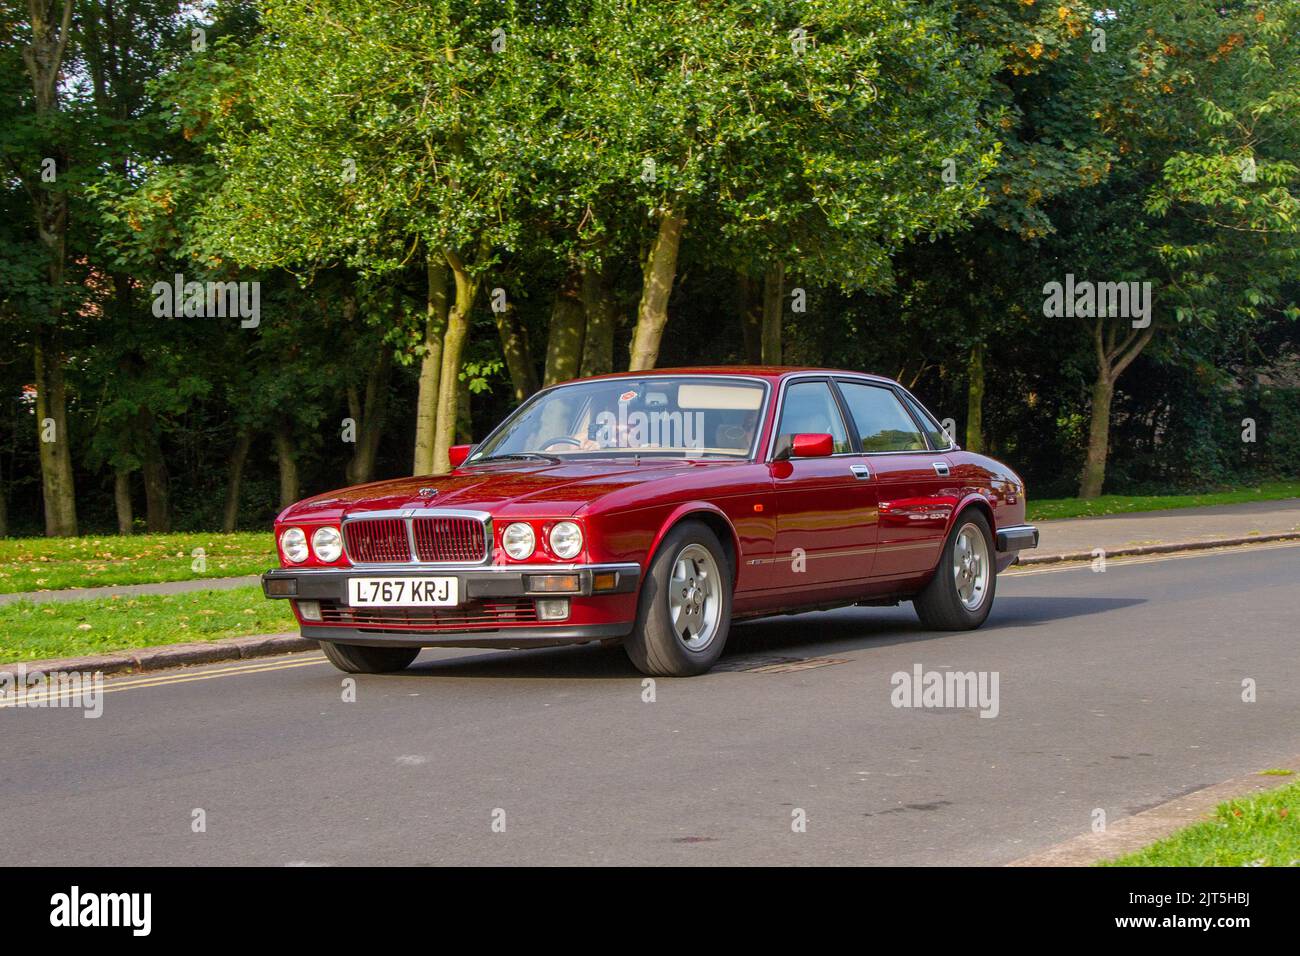 1994 90s nineties British JAGUAR Red XJ Gold 3239cc petrol 4 speed automatic; arriving at The annual Stanley Park Classic Car Show in the Italian Gardens. Stanley Park classics yesteryear Motor Show Hosted By Blackpool Vintage Vehicle Preservation Group, UK. Stock Photo